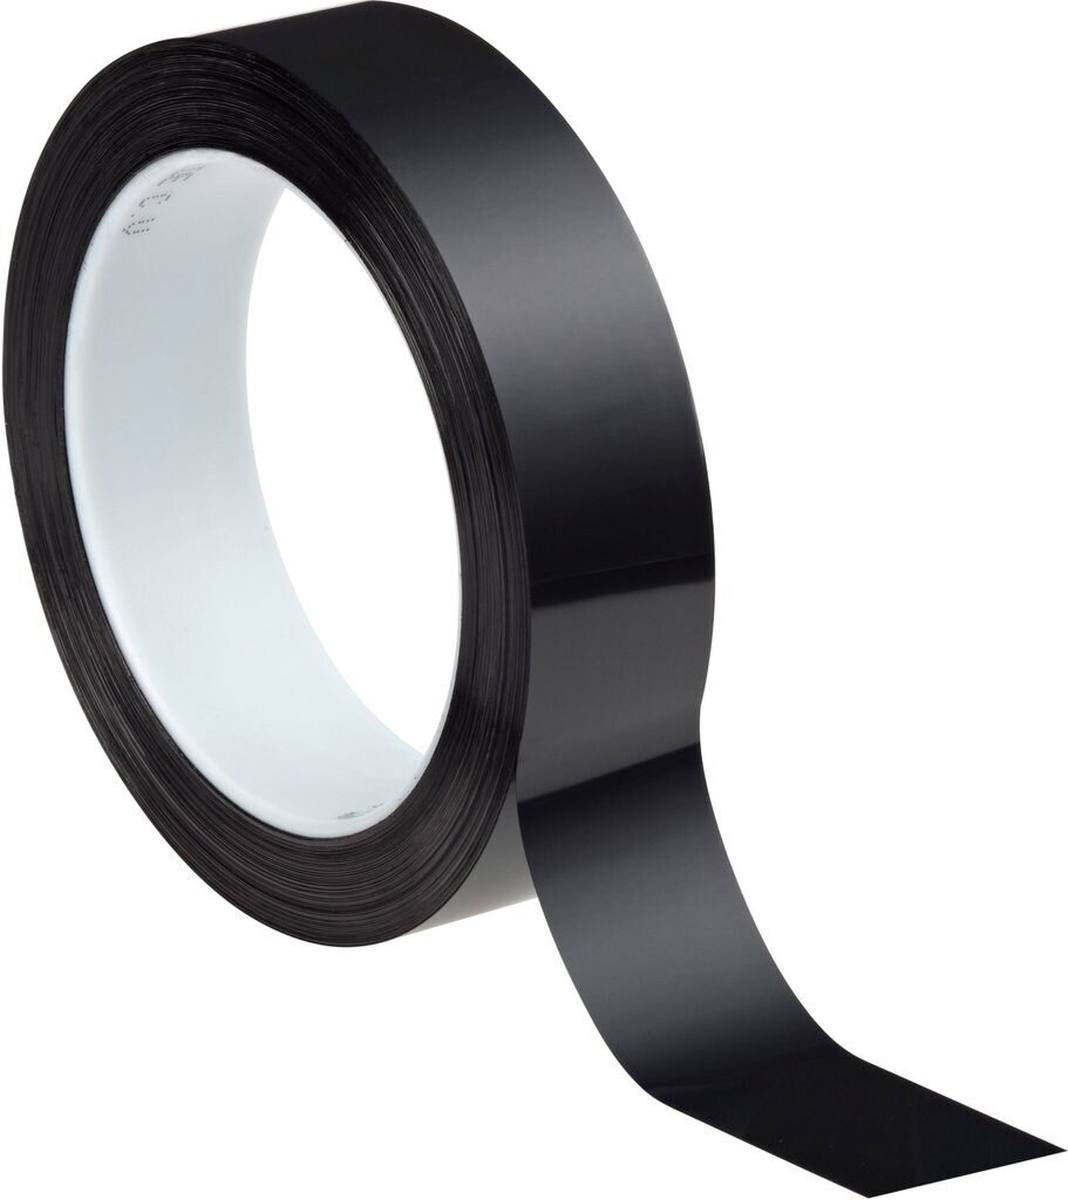 3M polyester adhesive tape 850 T, transparent, 25 mm x 66 m, 0.05 mm